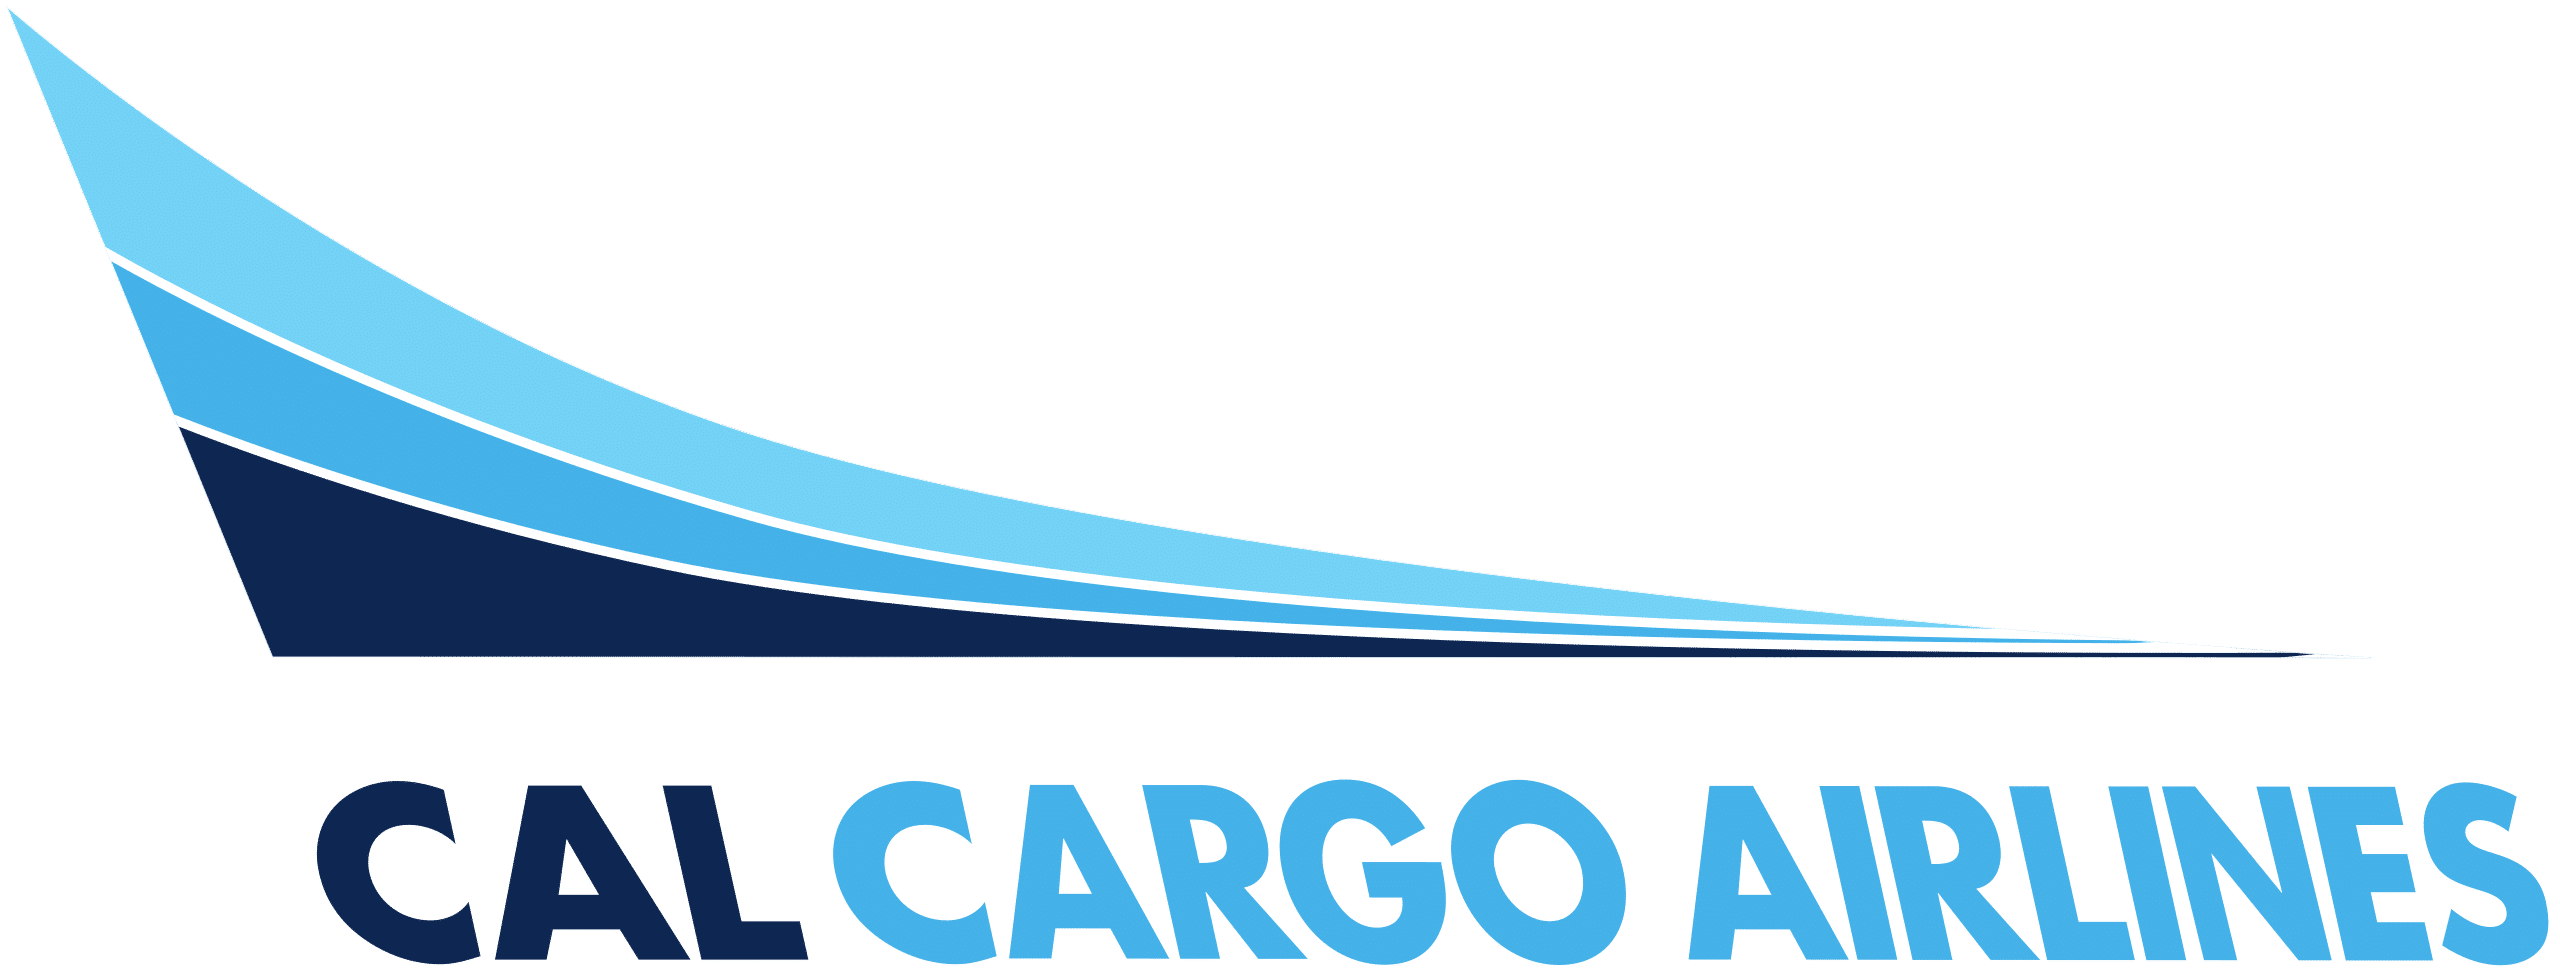 Cal Cargo Airlines 